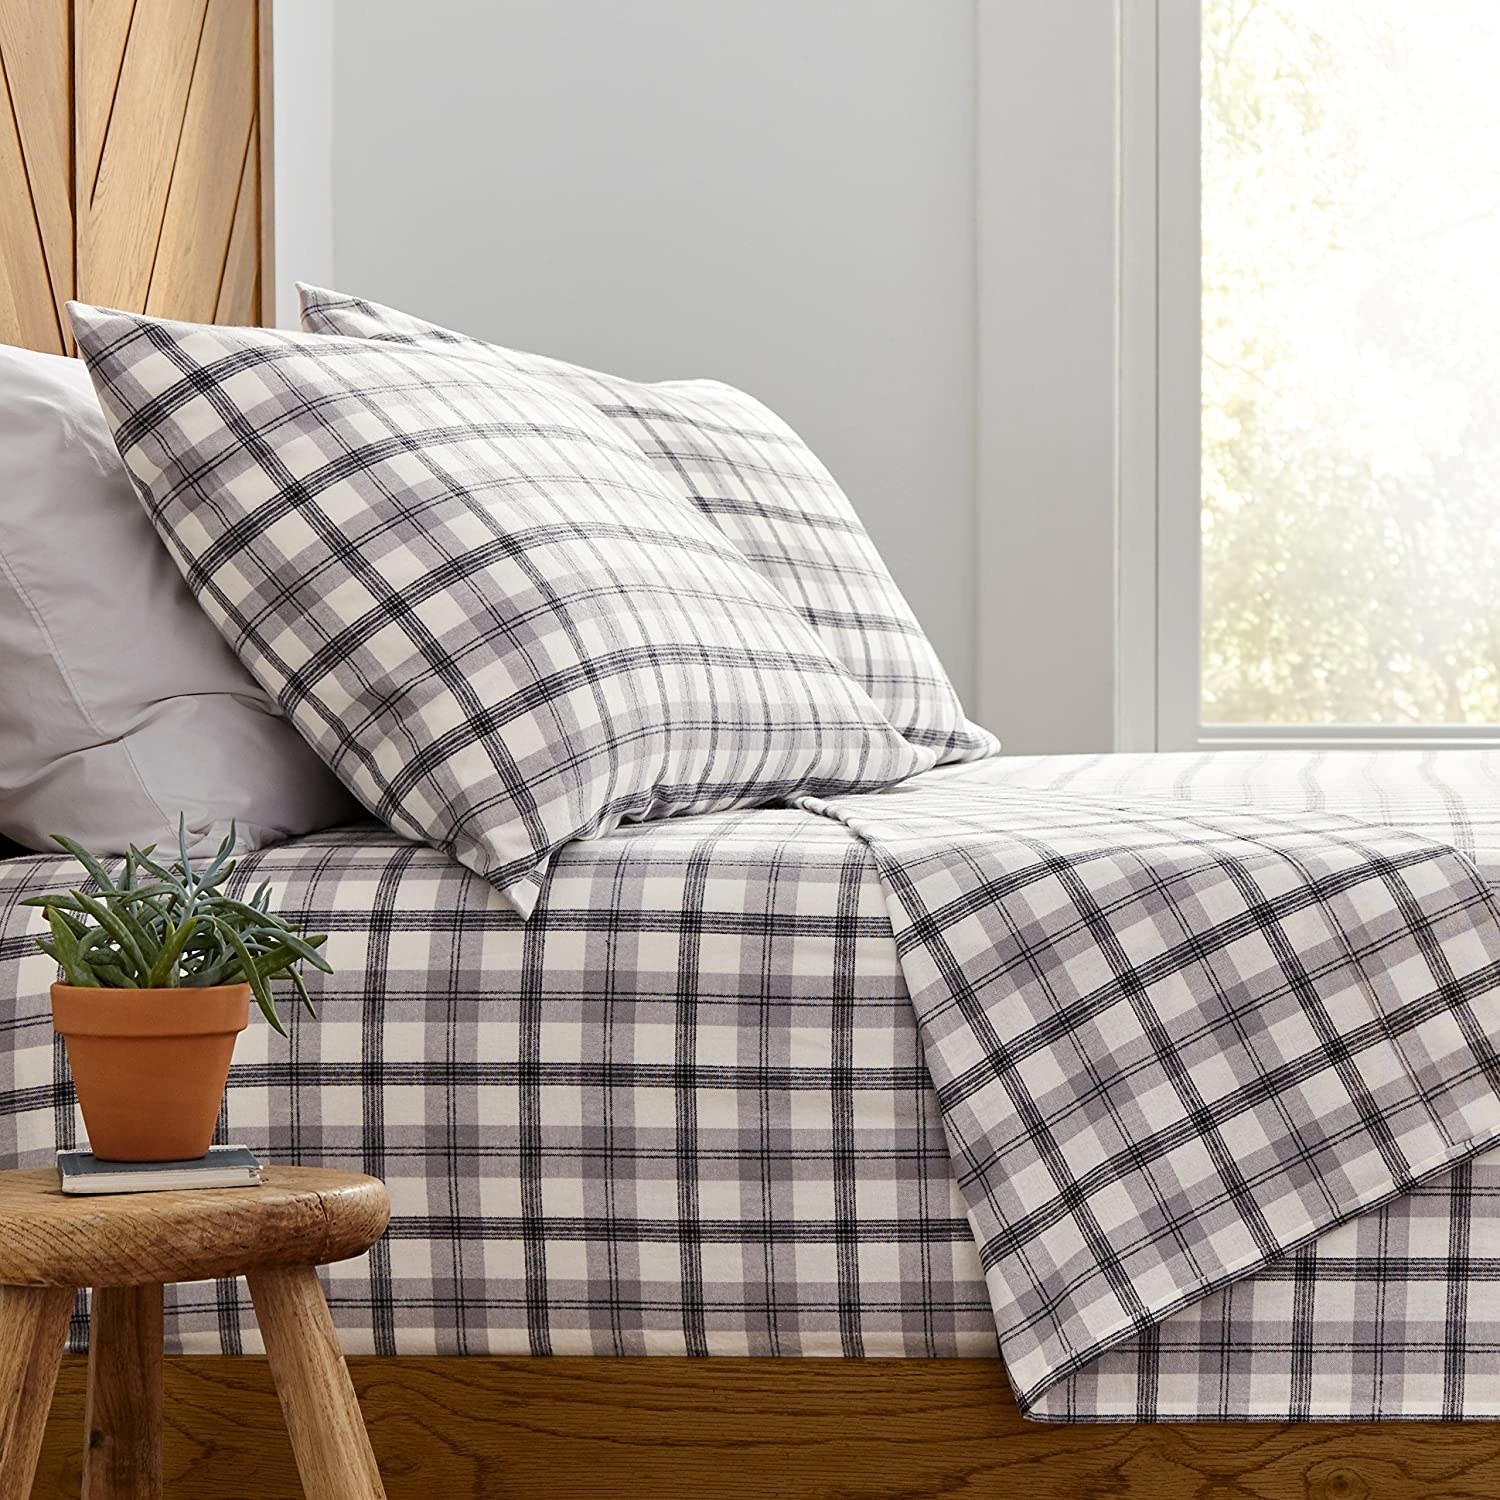 A bed with flannel bed sheets on it